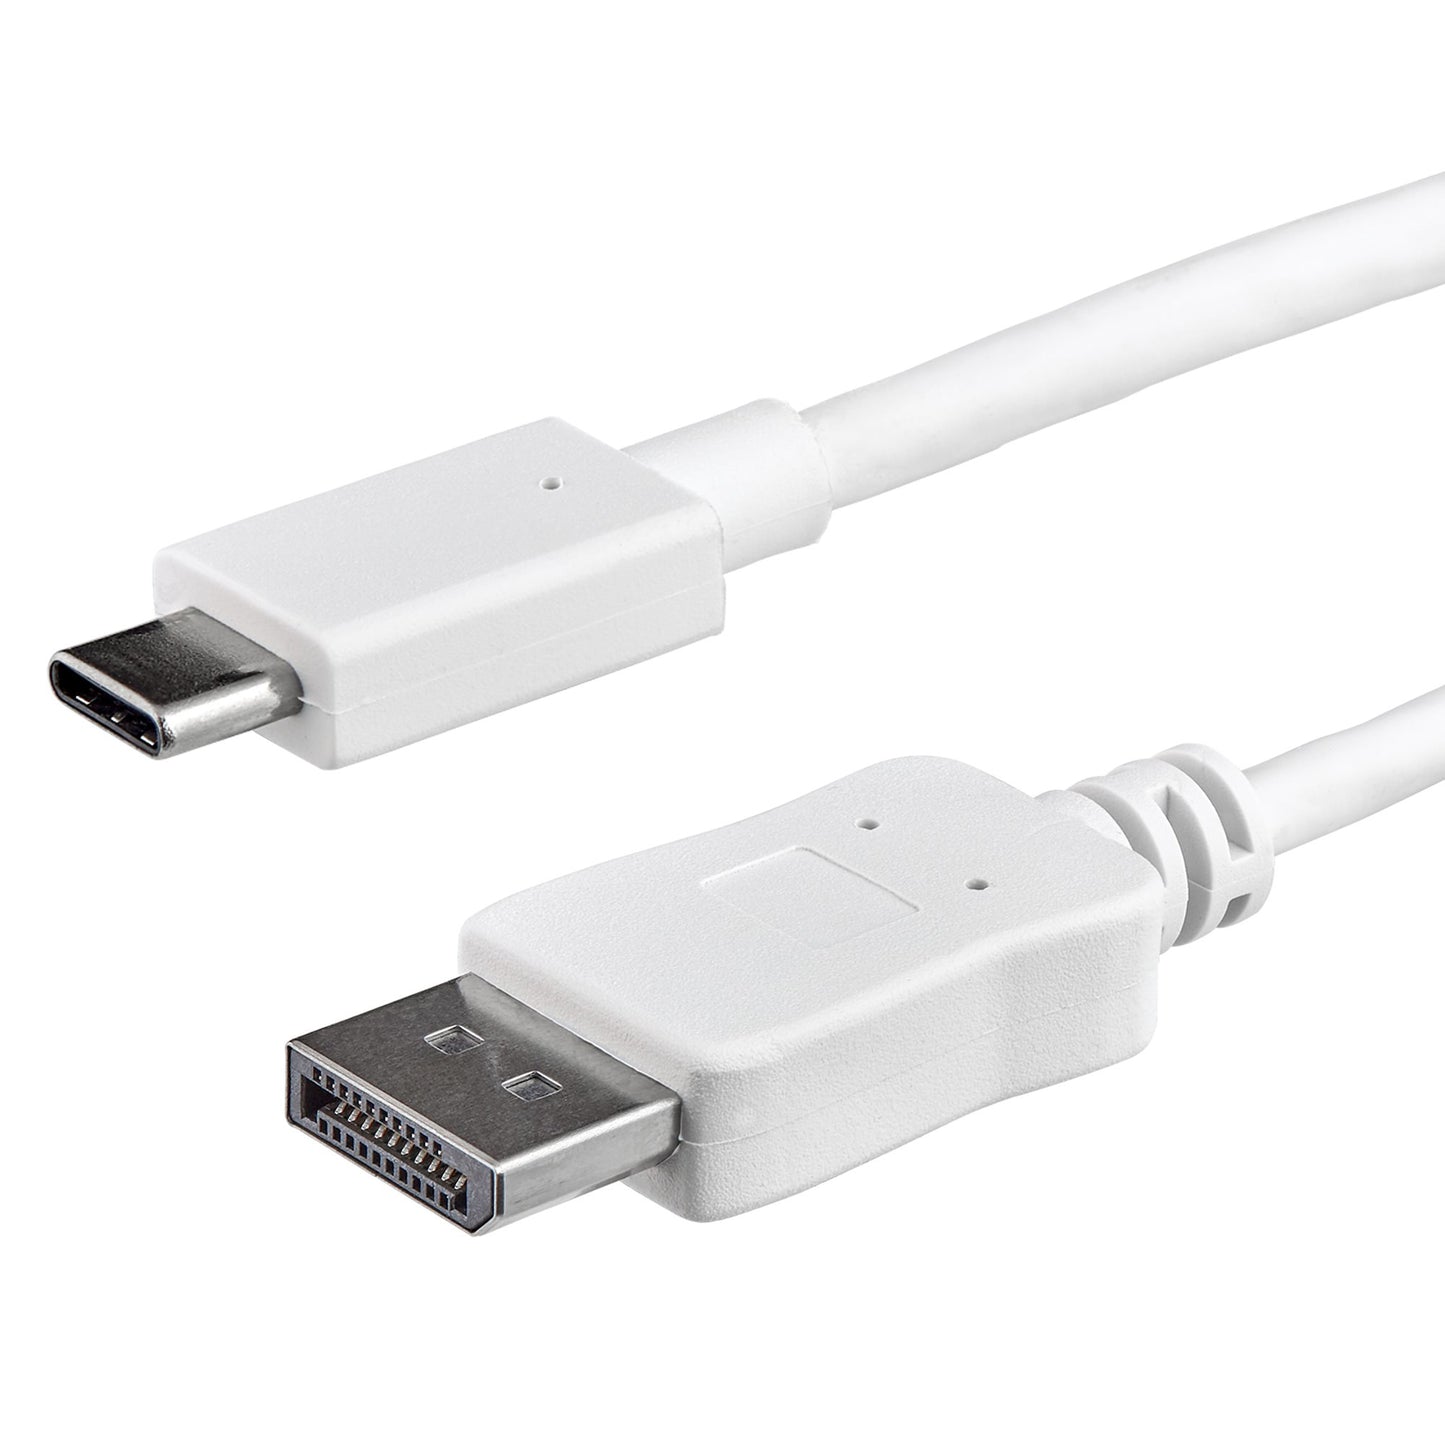 StarTech.com 3ft/1m USB C to DisplayPort 1.2 Cable 4K 60Hz - USB-C to DisplayPort Adapter Cable HBR2 - USB Type-C DP Alt Mode to DP Monitor Video Cable - Works w/ Thunderbolt 3 - White-0